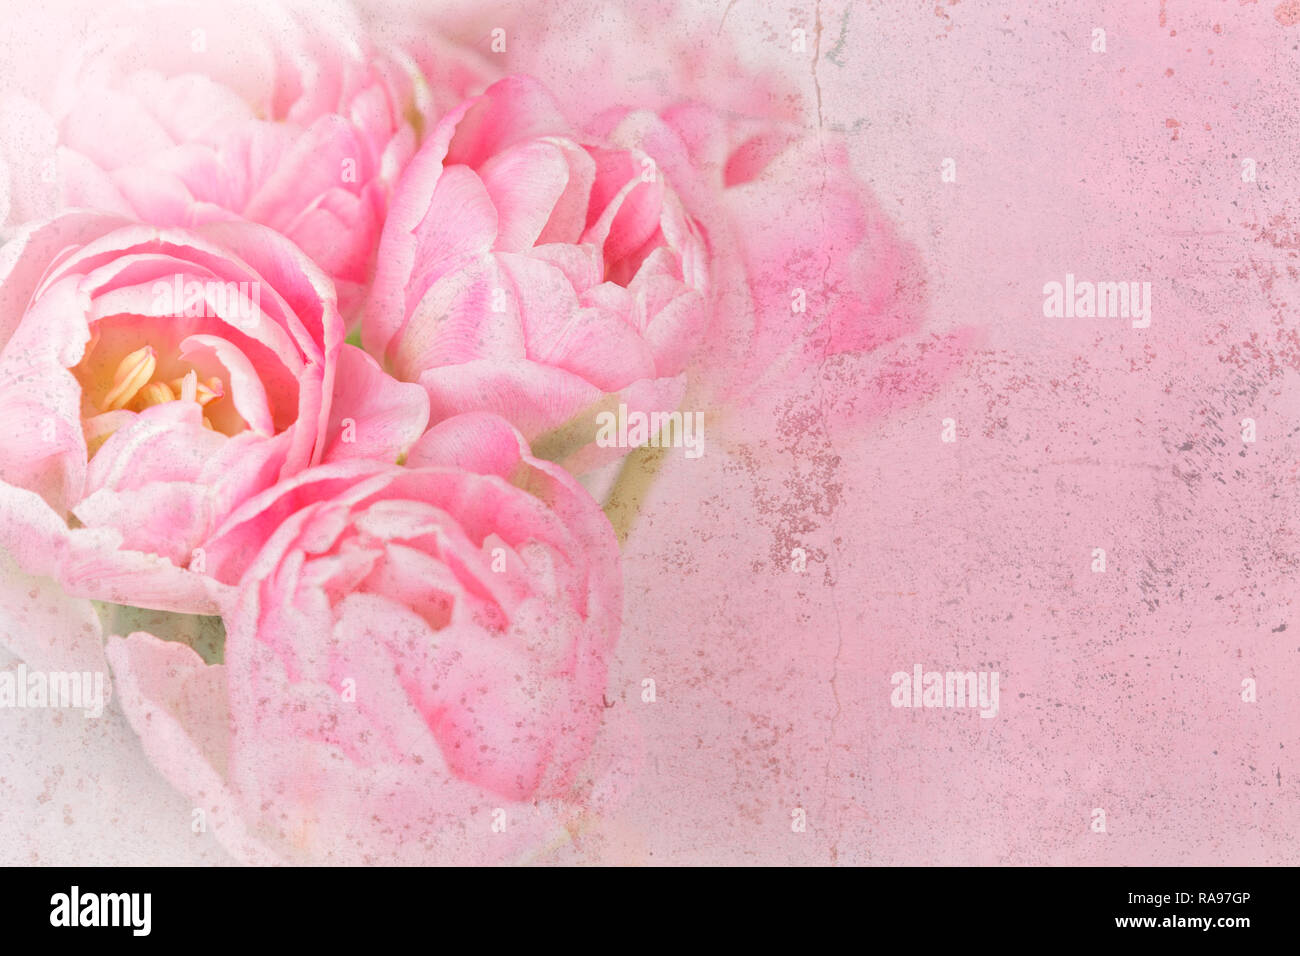 Tulip flowers in shades of pink, distressed grunge effect, nostalgic and romantic background template for florists or greeting cards Stock Photo